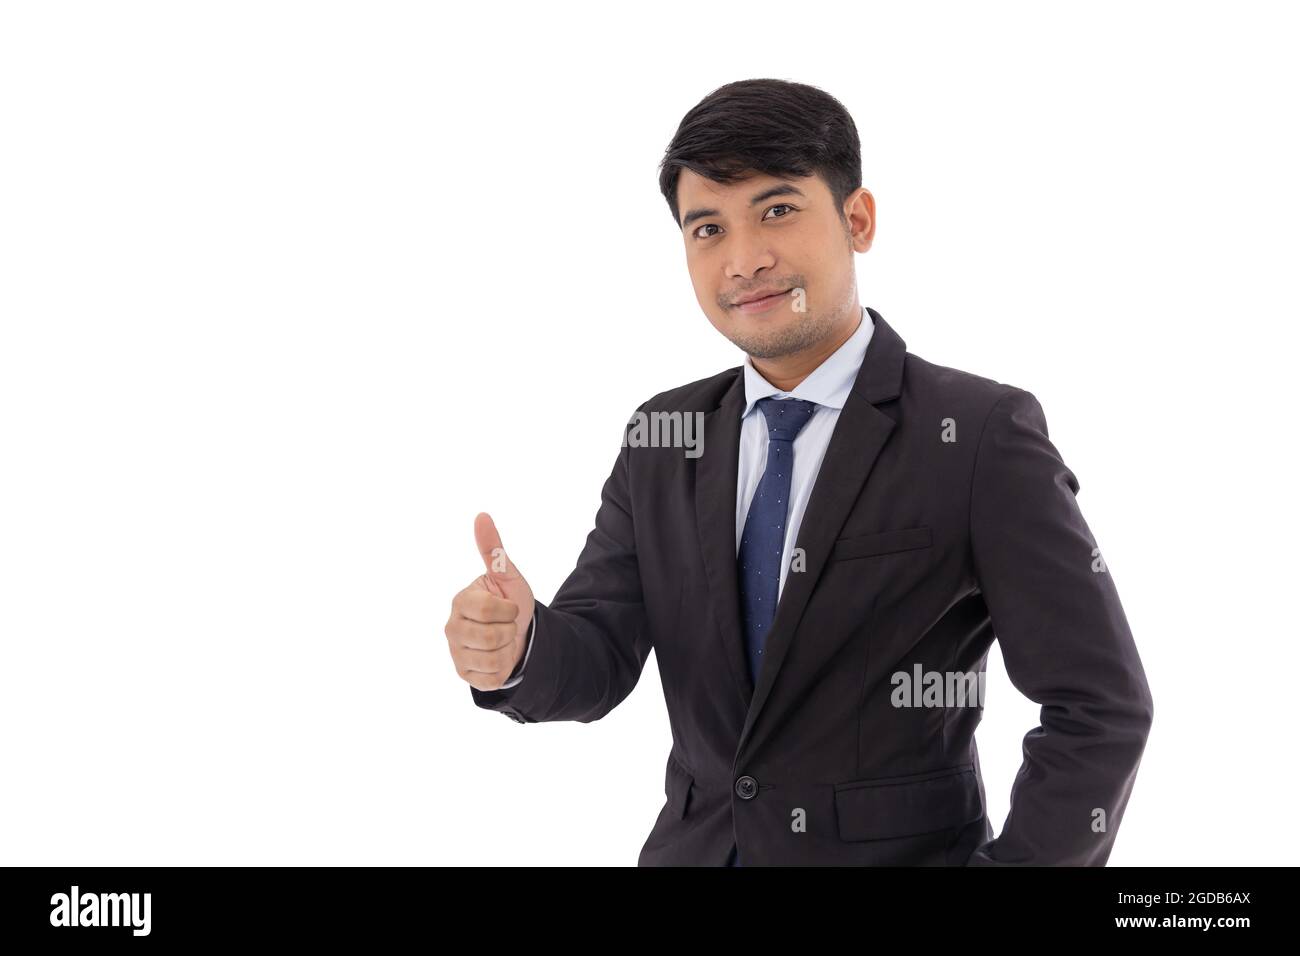 Adult Professional Asian business man male thumbs up standing confident isolated on white background with clipping path. Stock Photo